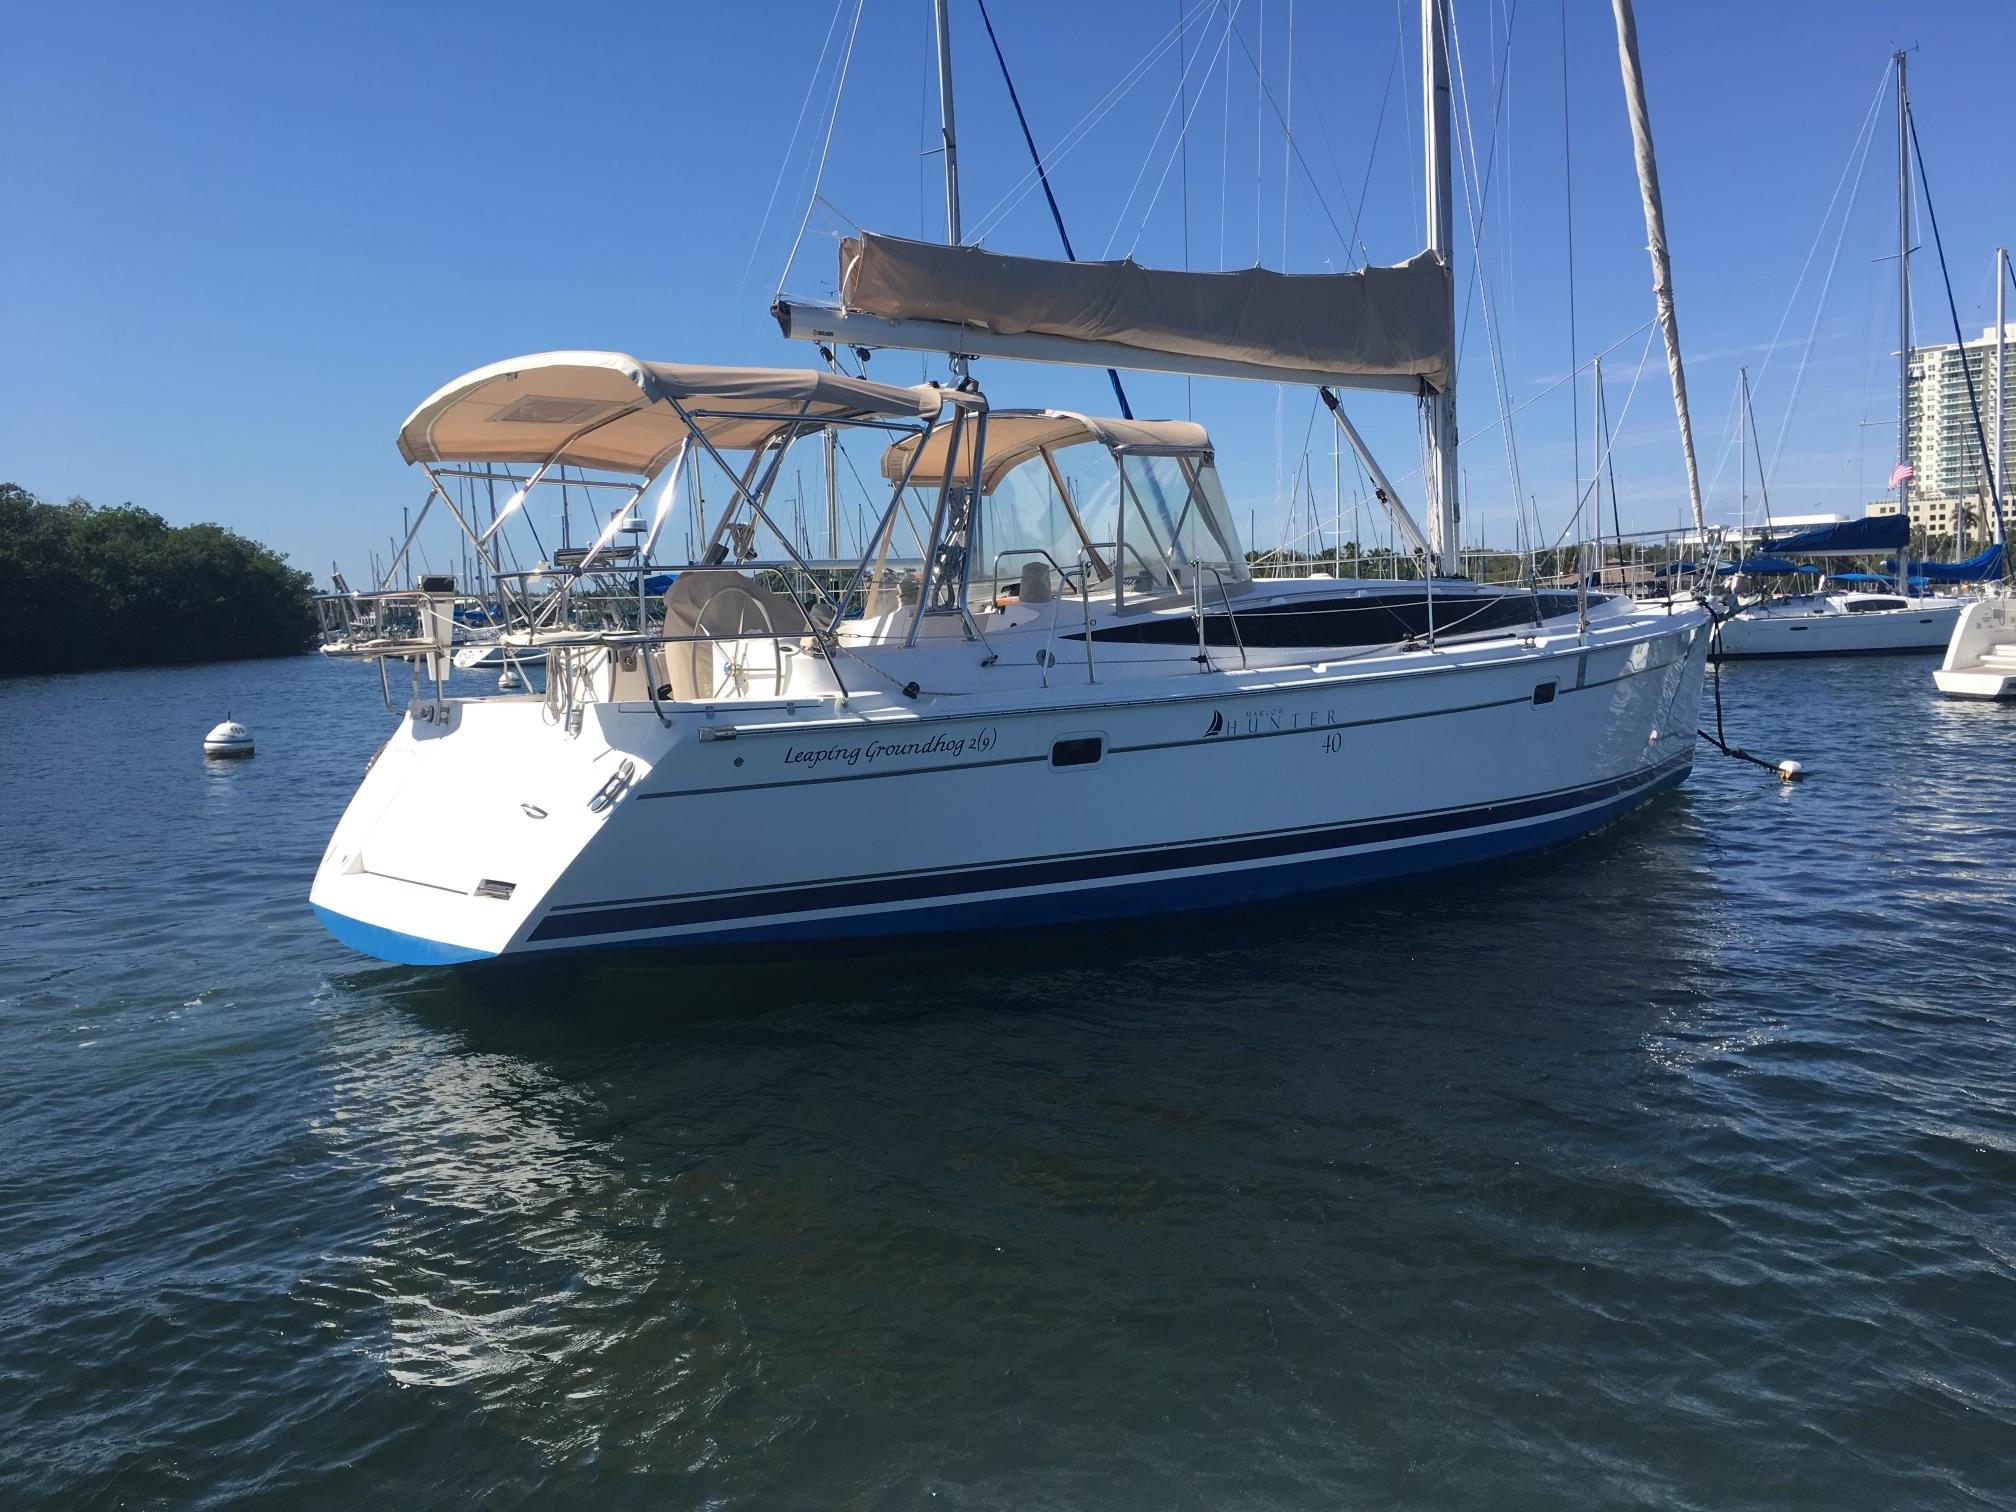 M 6209 SK Knot 10 Yacht Sales